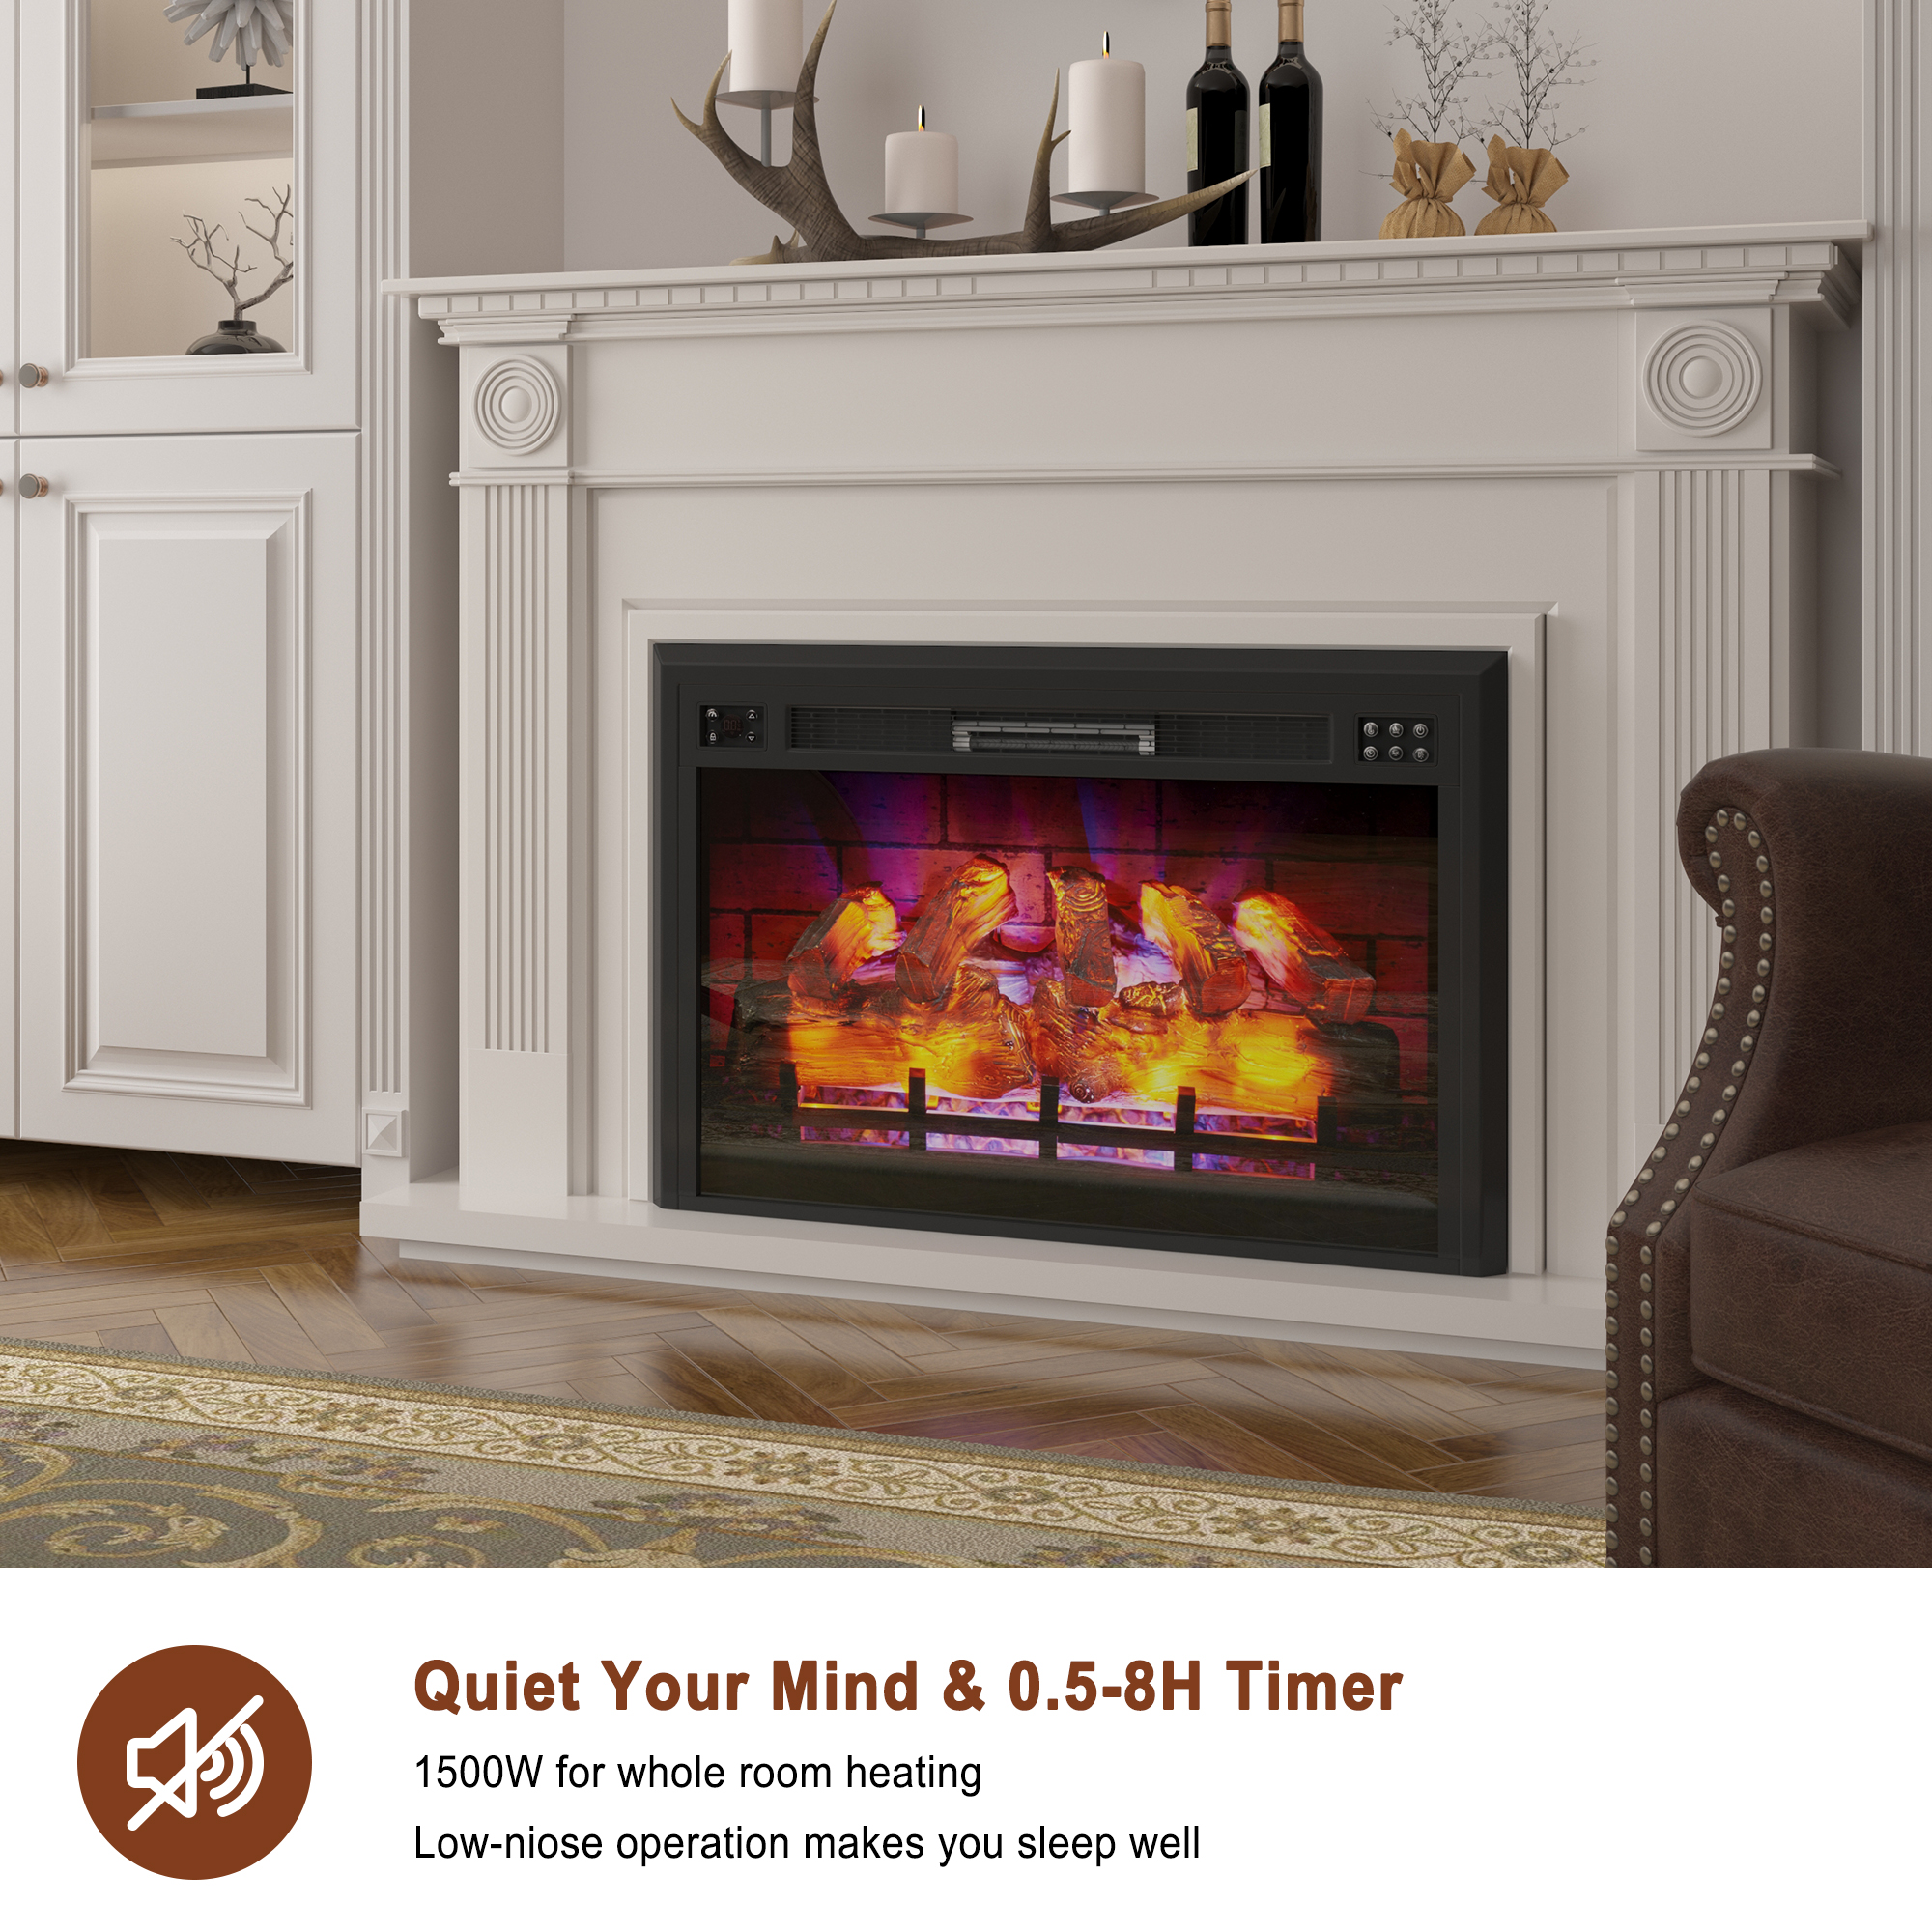 Mondawe 35 in. 5120 BTU Recessed Electric Fireplace with Remote Control & Double Overheat Protection-Mondawe